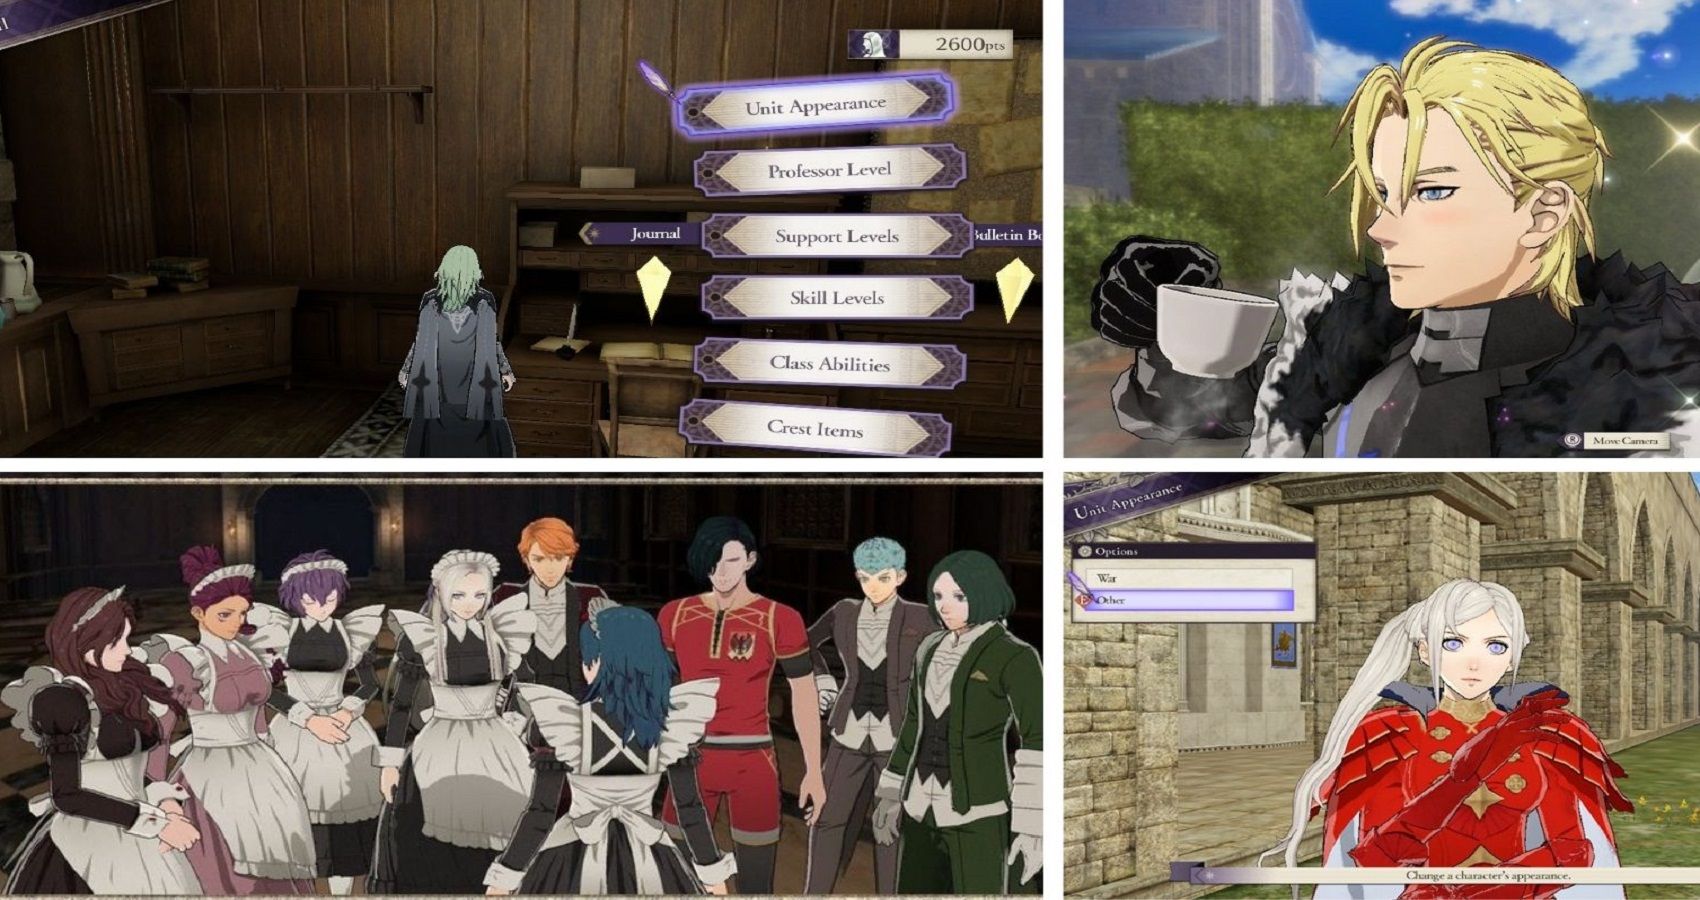 Do you need to play Fire Emblem: Three Houses before playing Fire